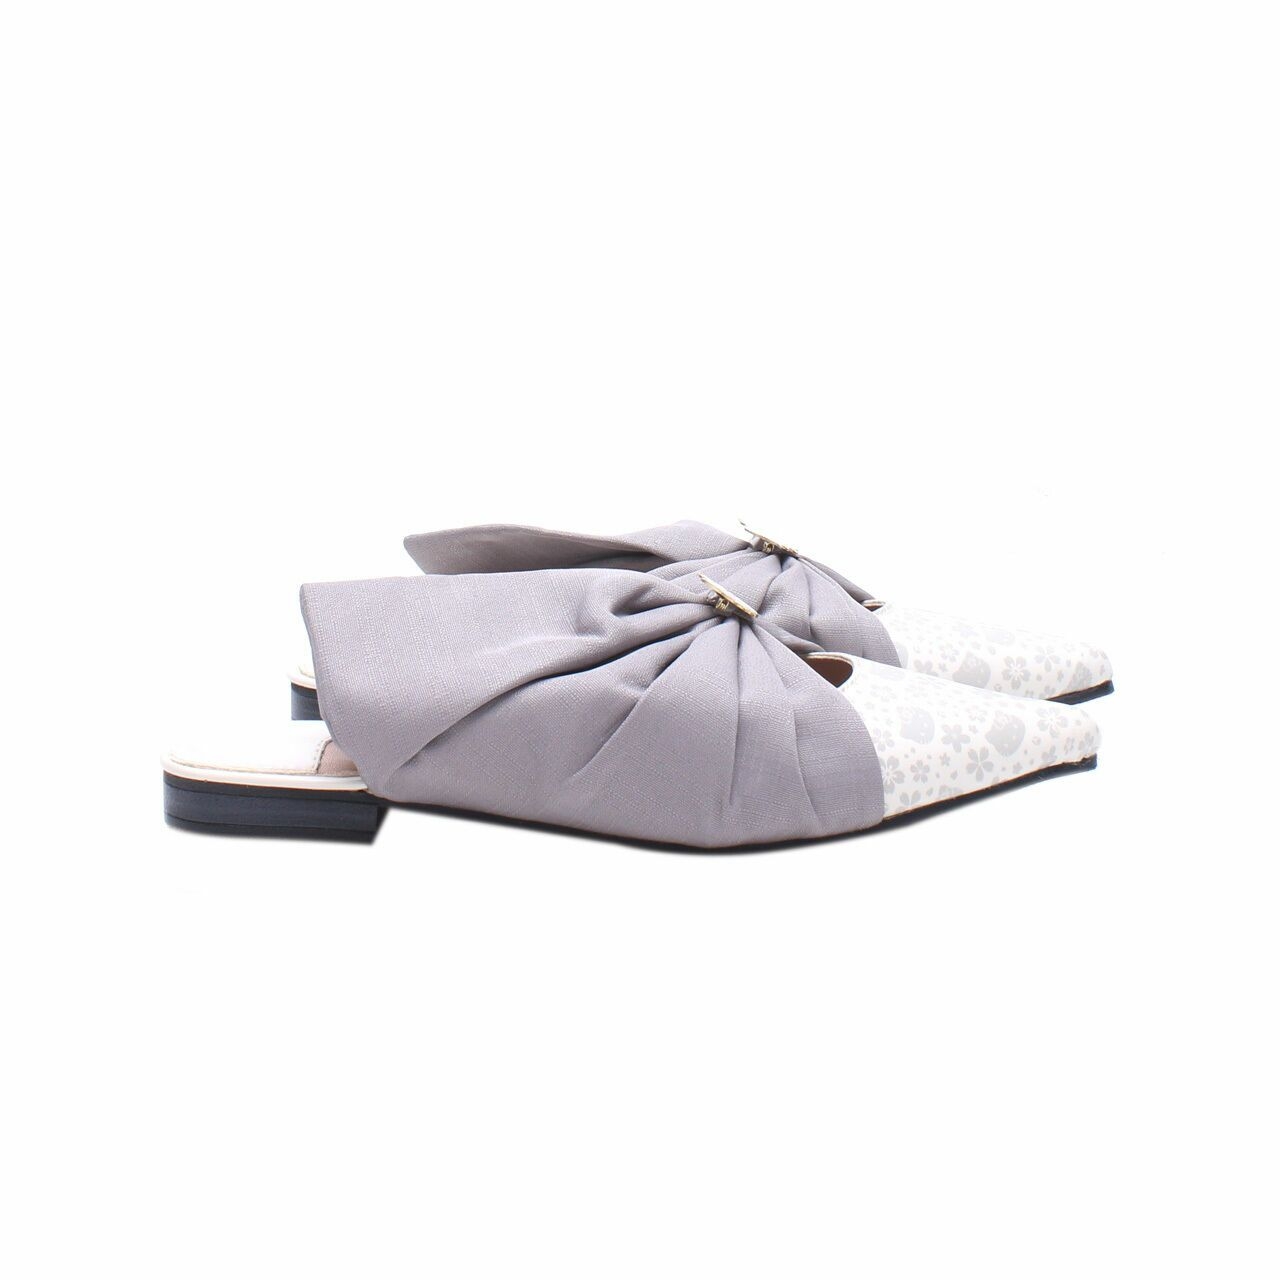 Solesister x Hello Kitty Grey Mules Sandals